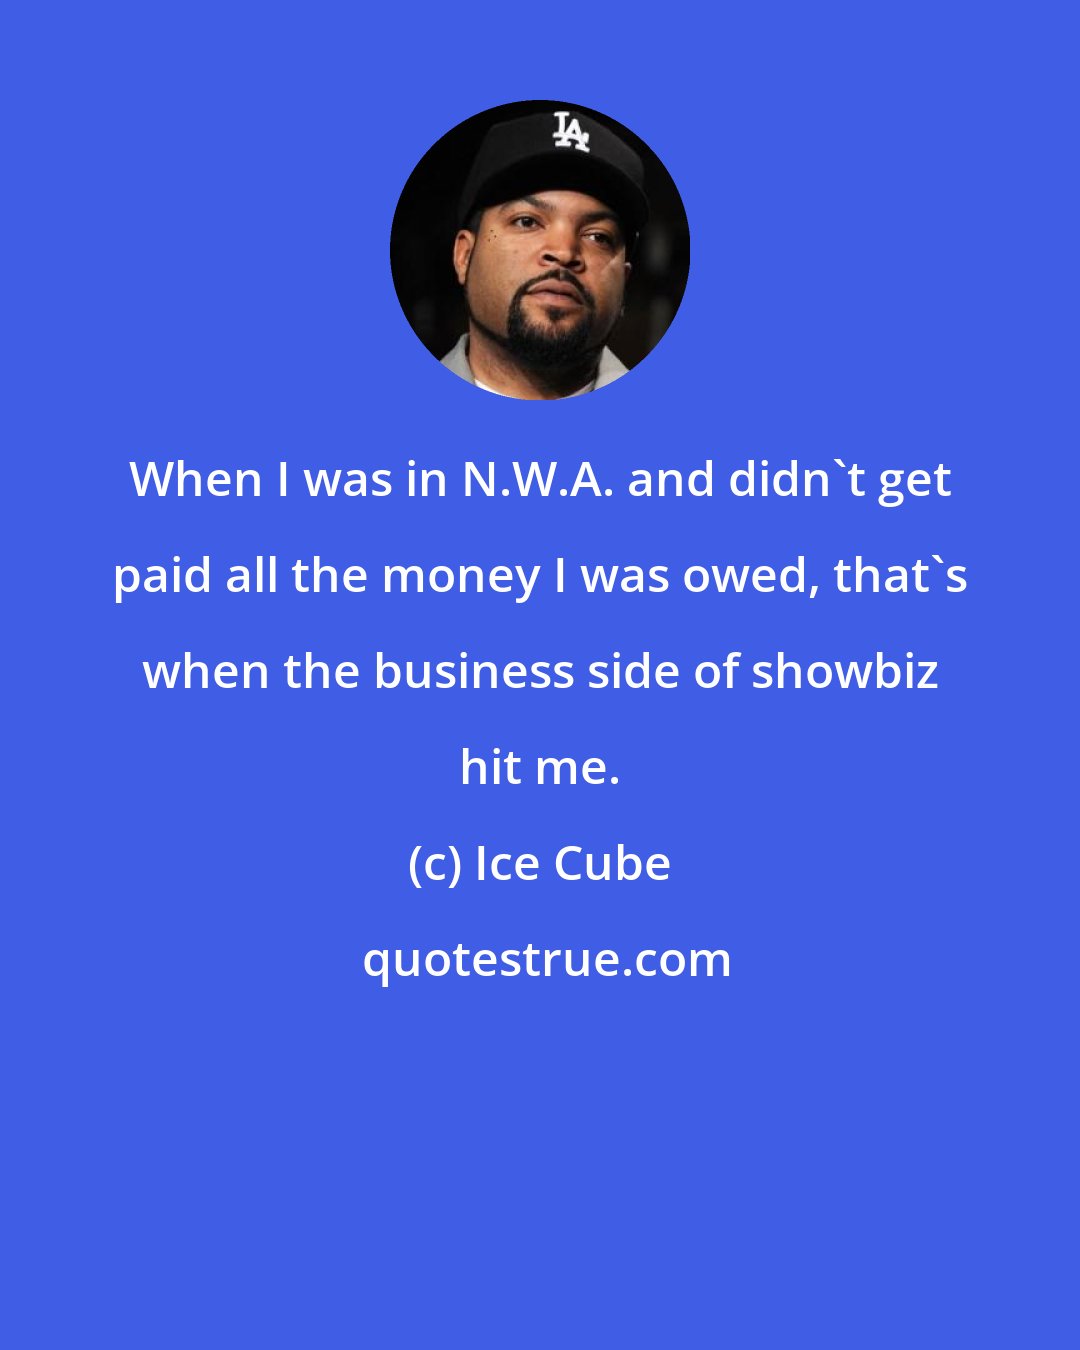 Ice Cube: When I was in N.W.A. and didn't get paid all the money I was owed, that's when the business side of showbiz hit me.